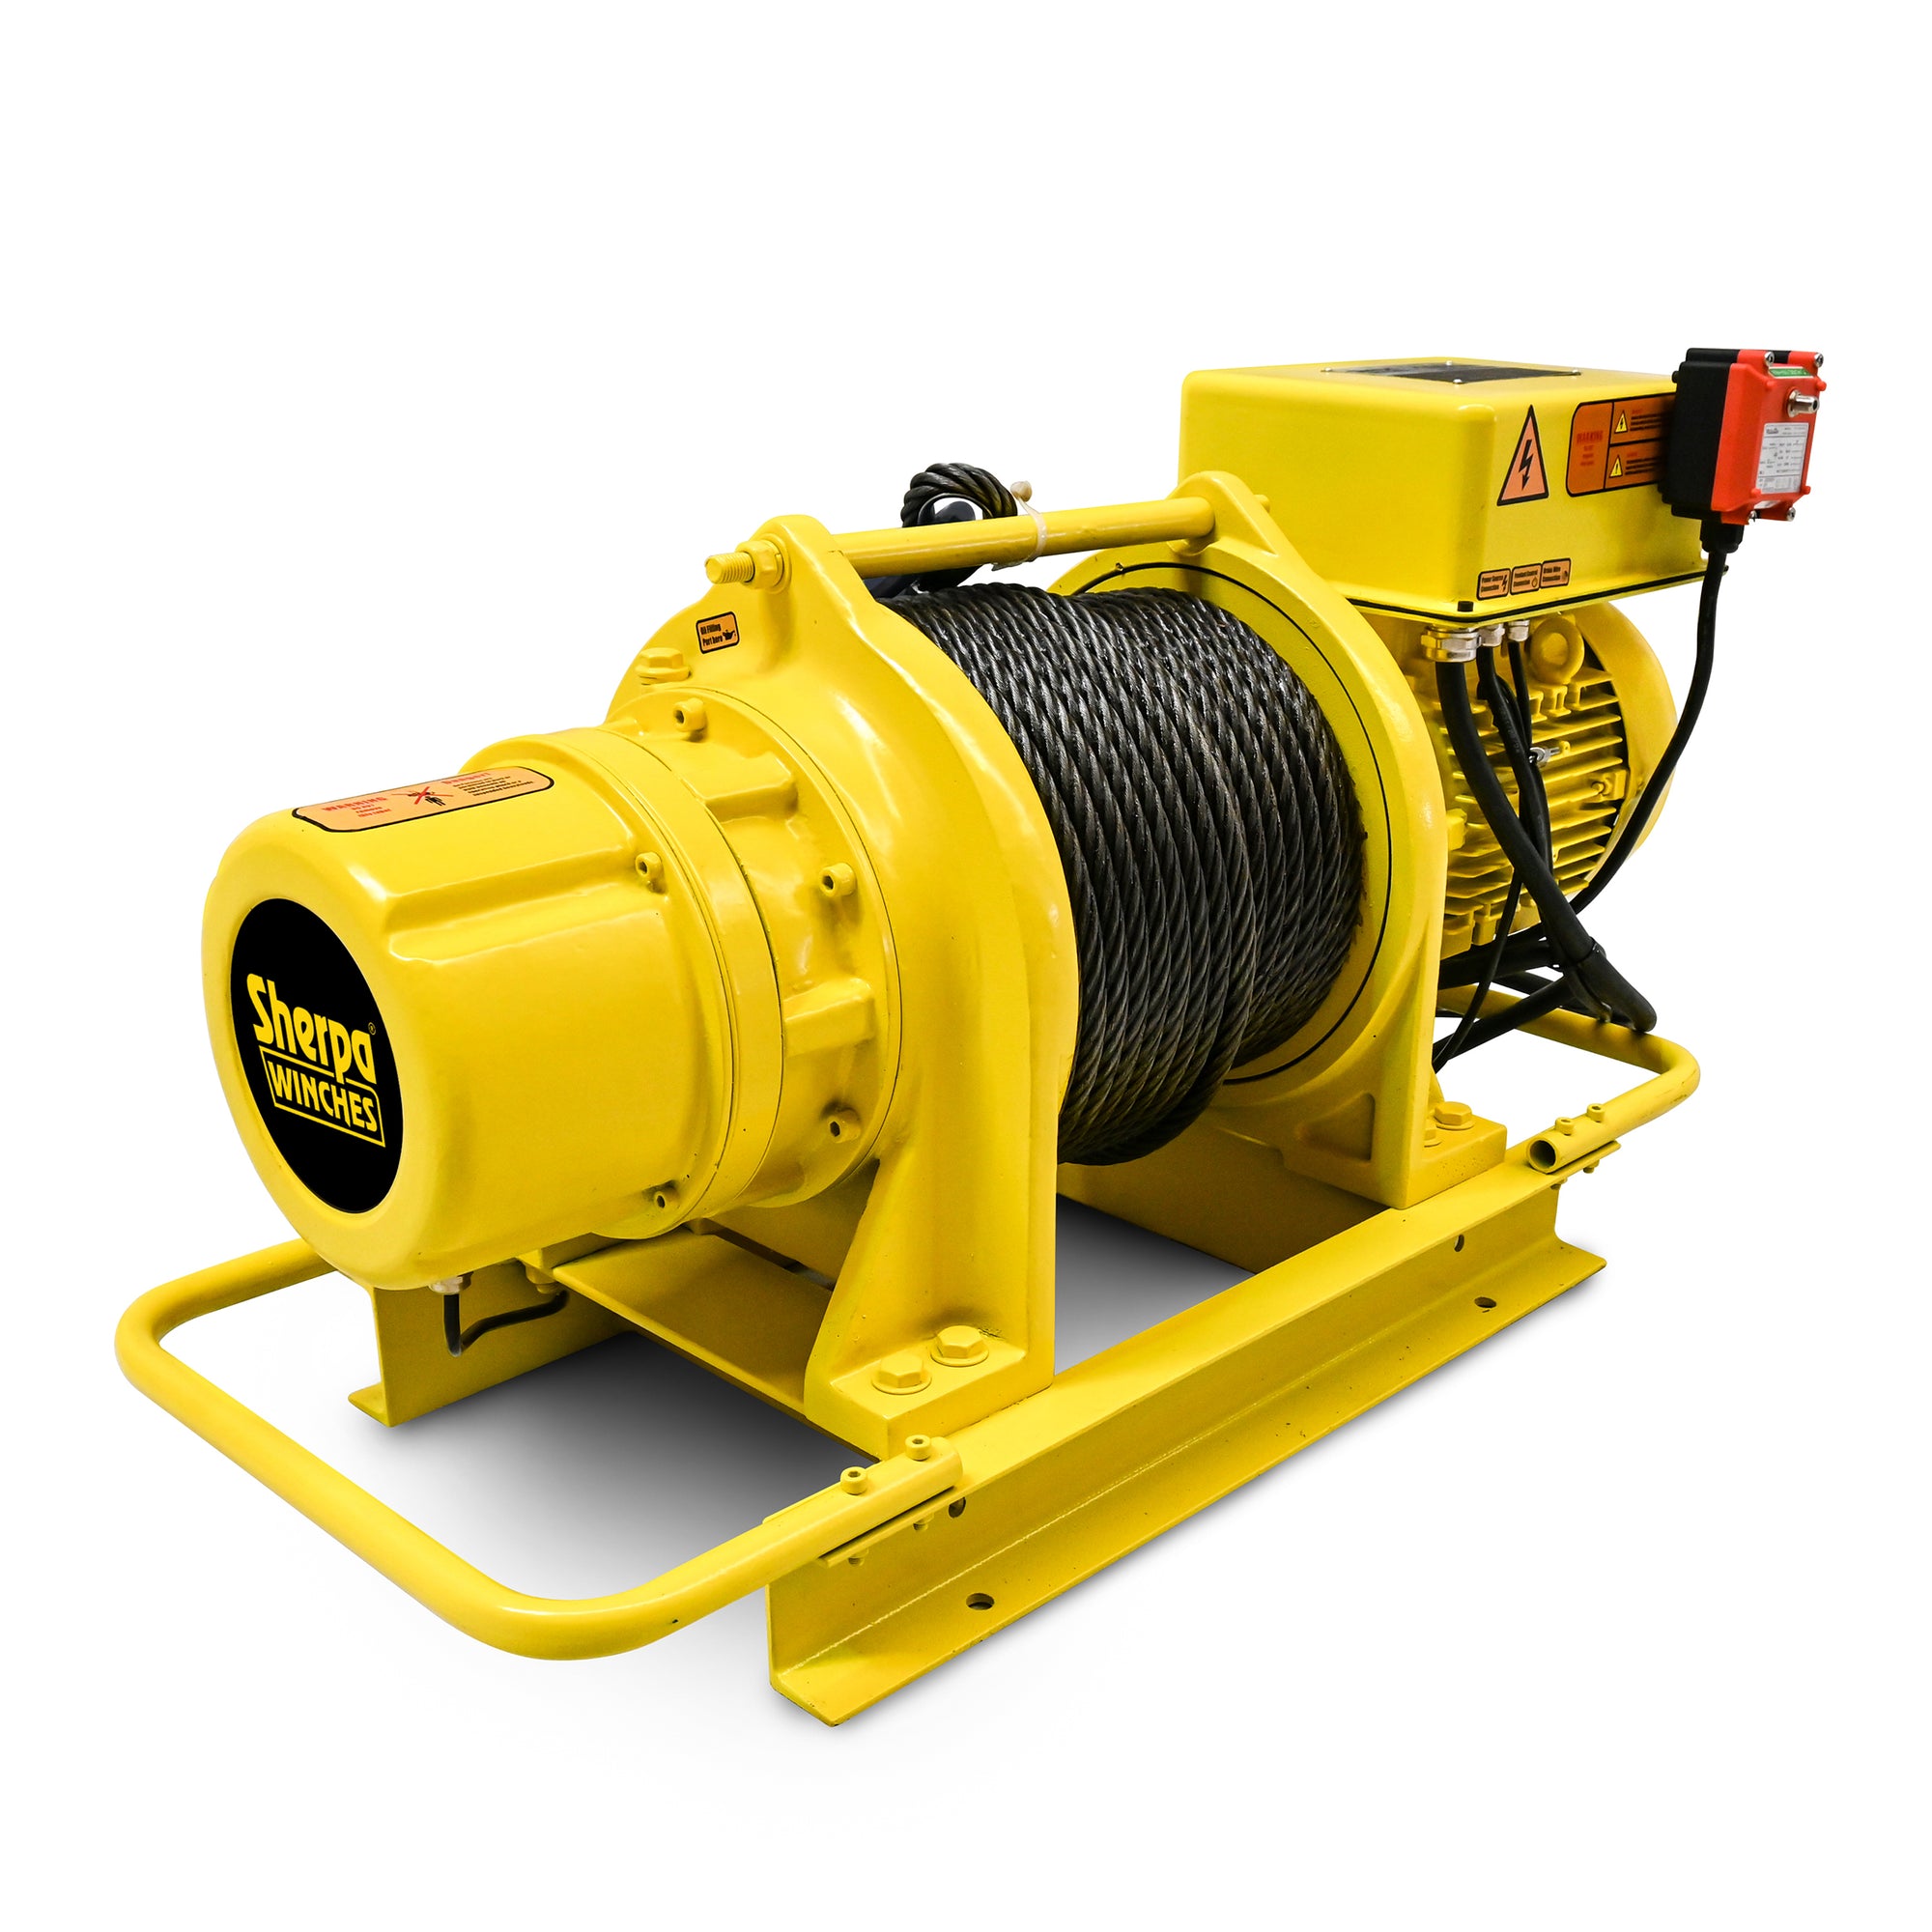 Sherpa 3-phase electric winch